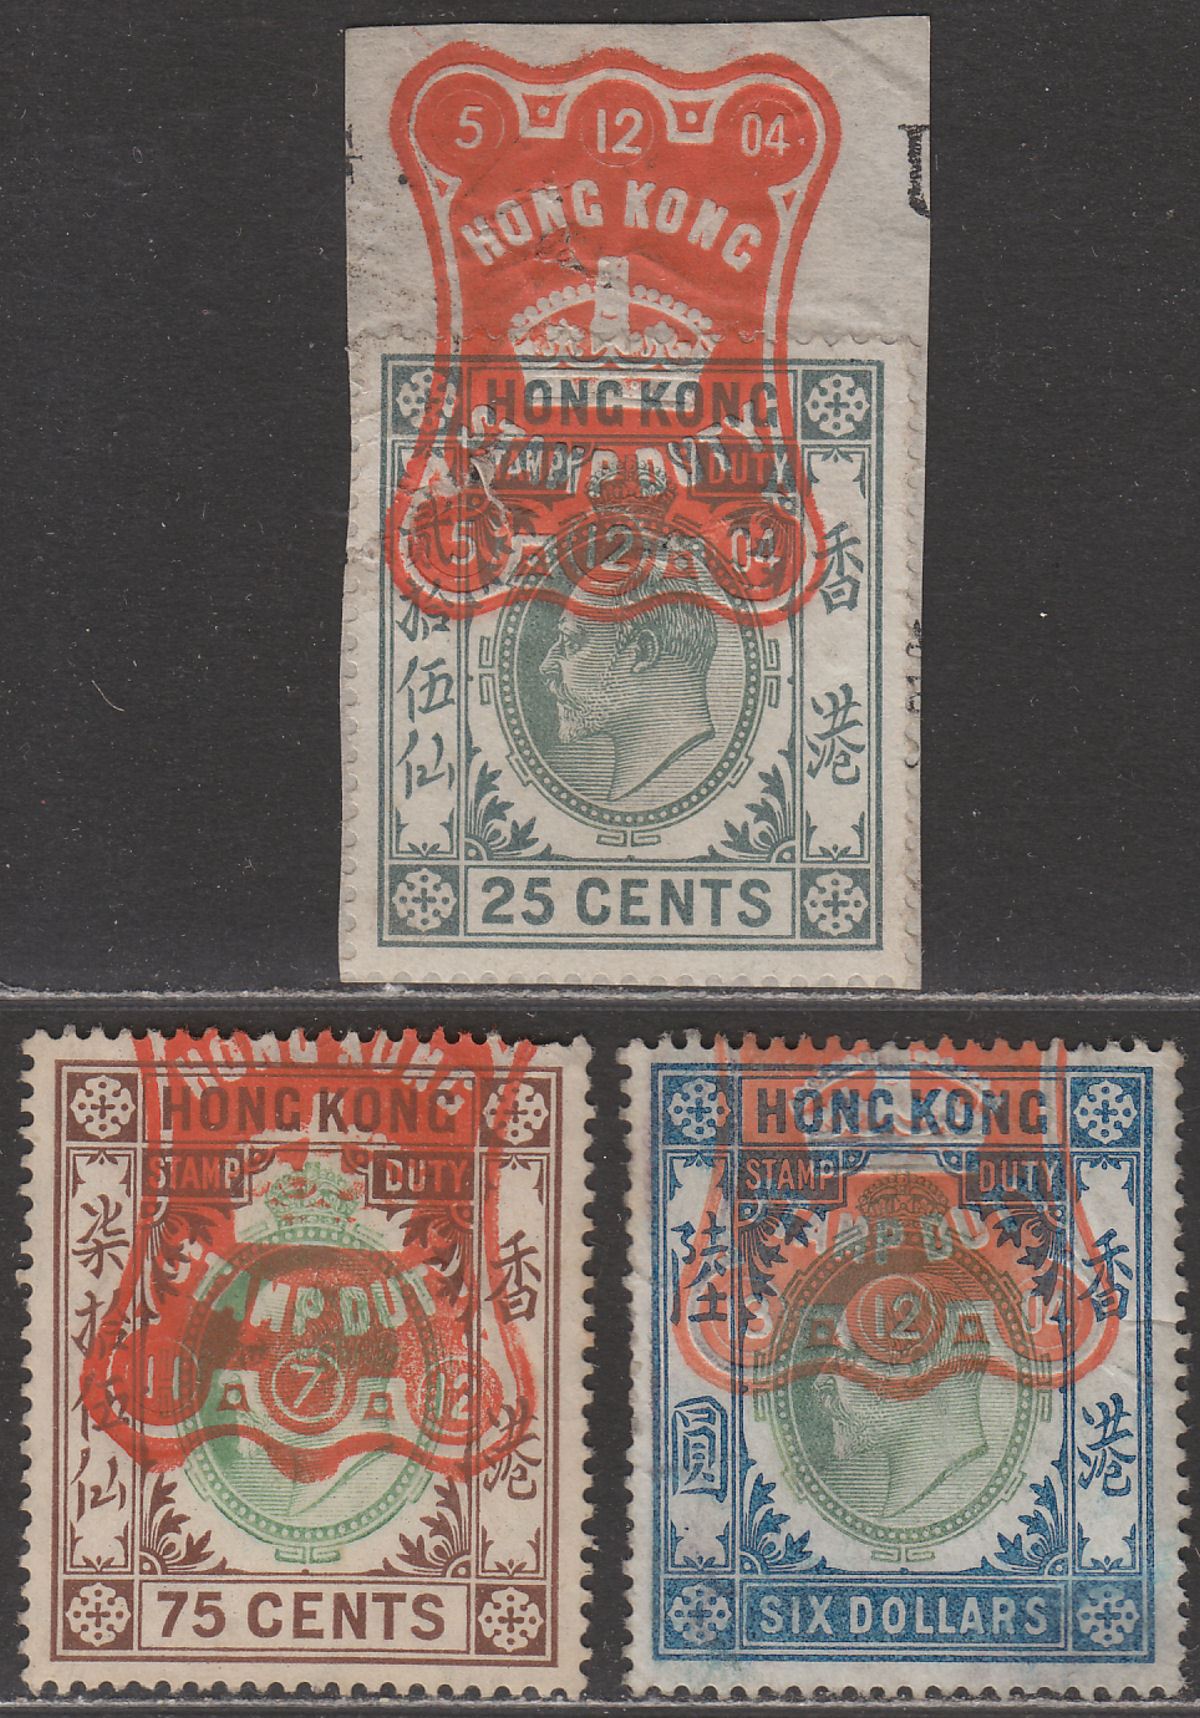 Hong Kong 1903-07 KEVII Revenue Stamp Duty 25c, 75c, $6 Used with faults